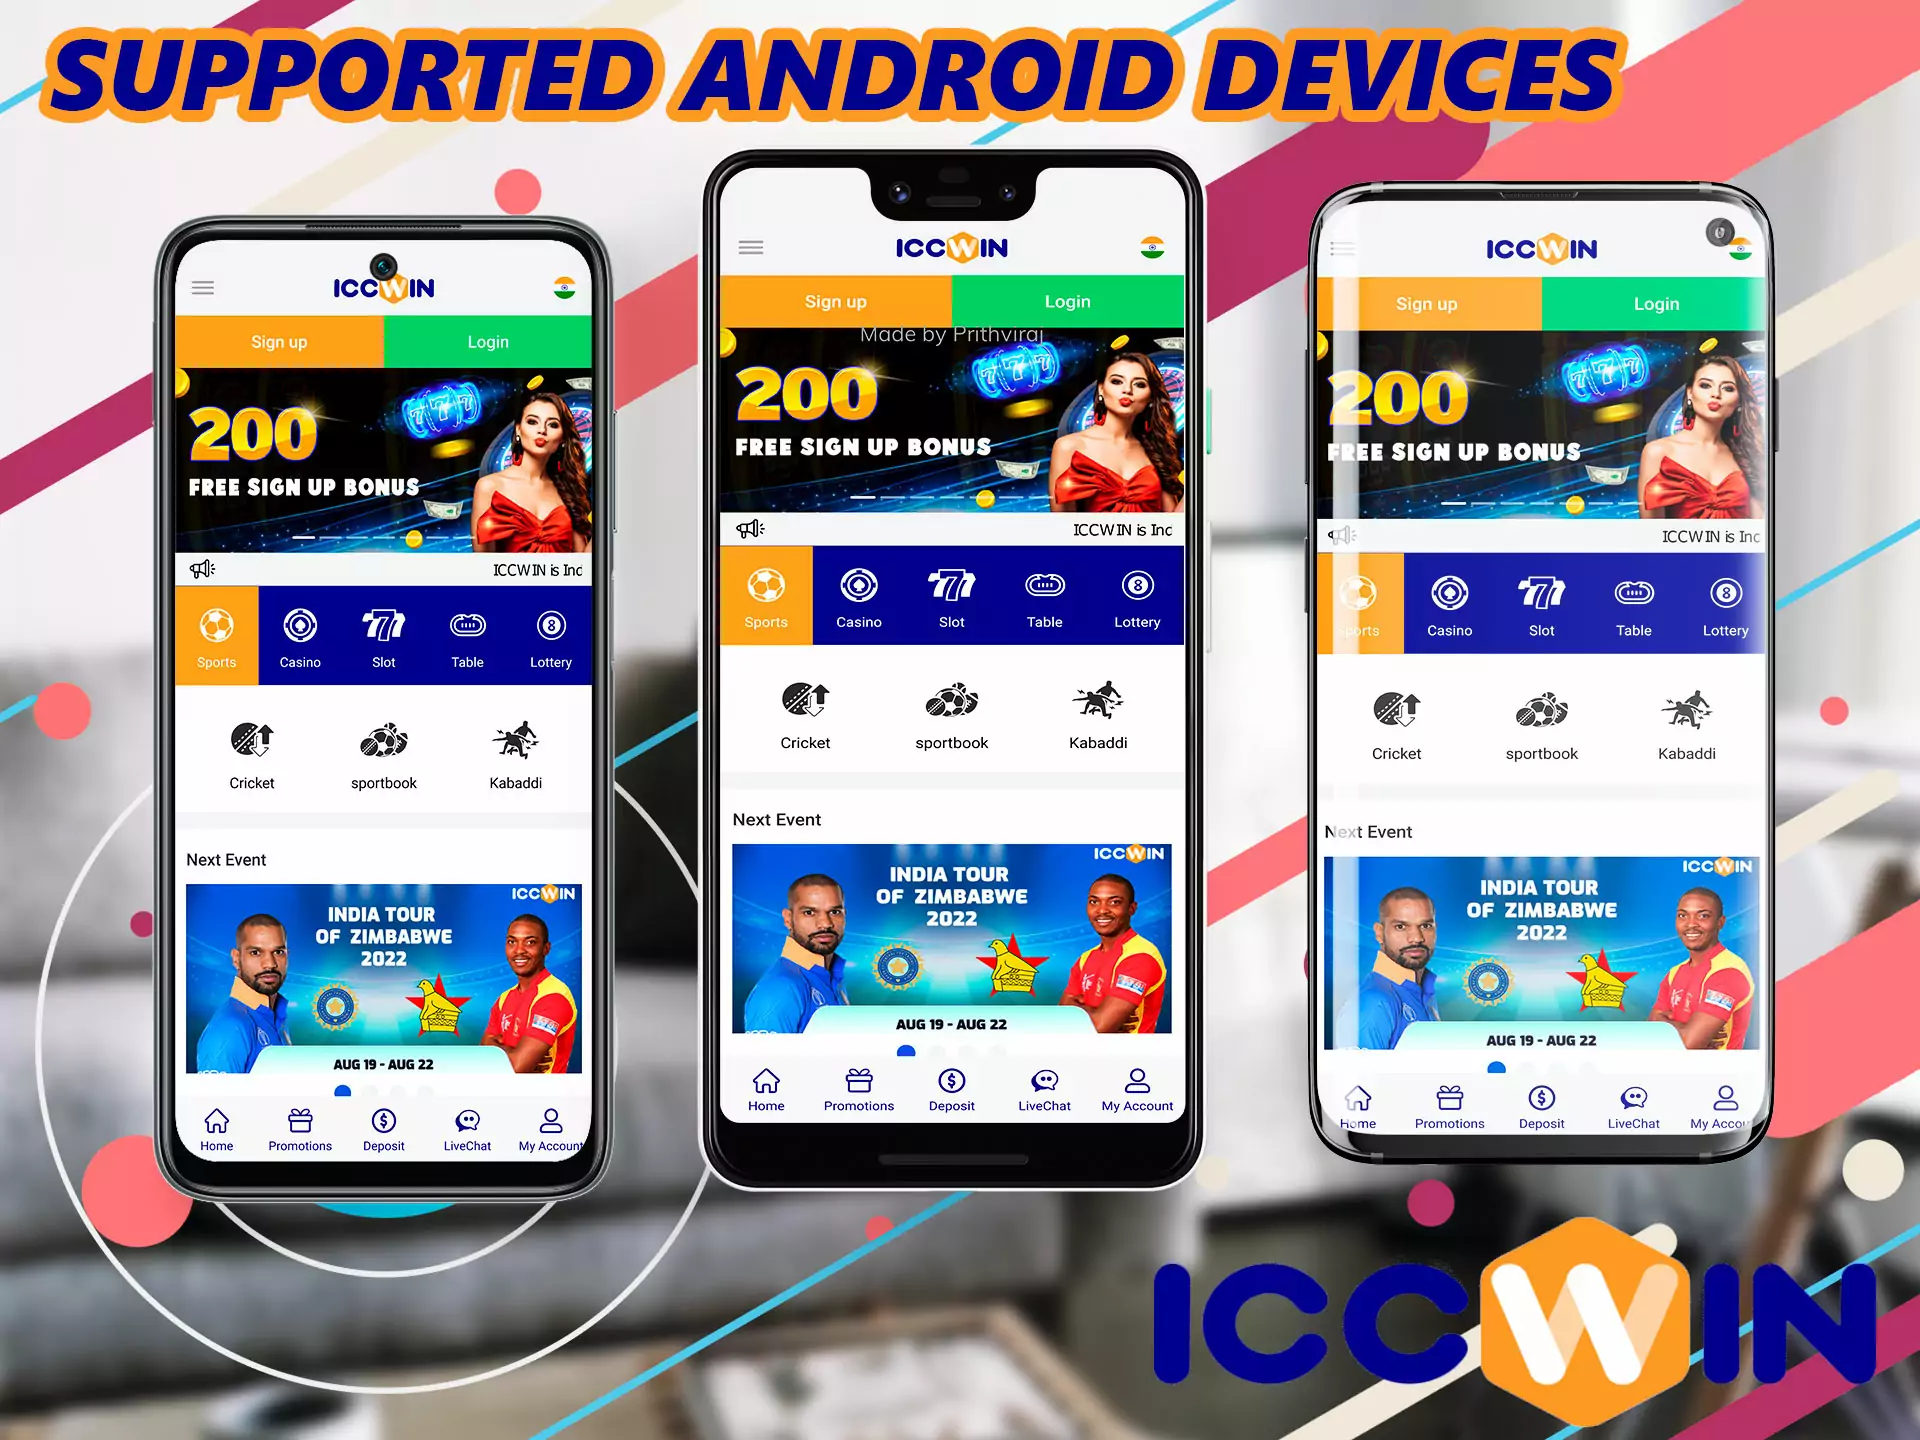 Find out which smartphones support the Iccwin app.